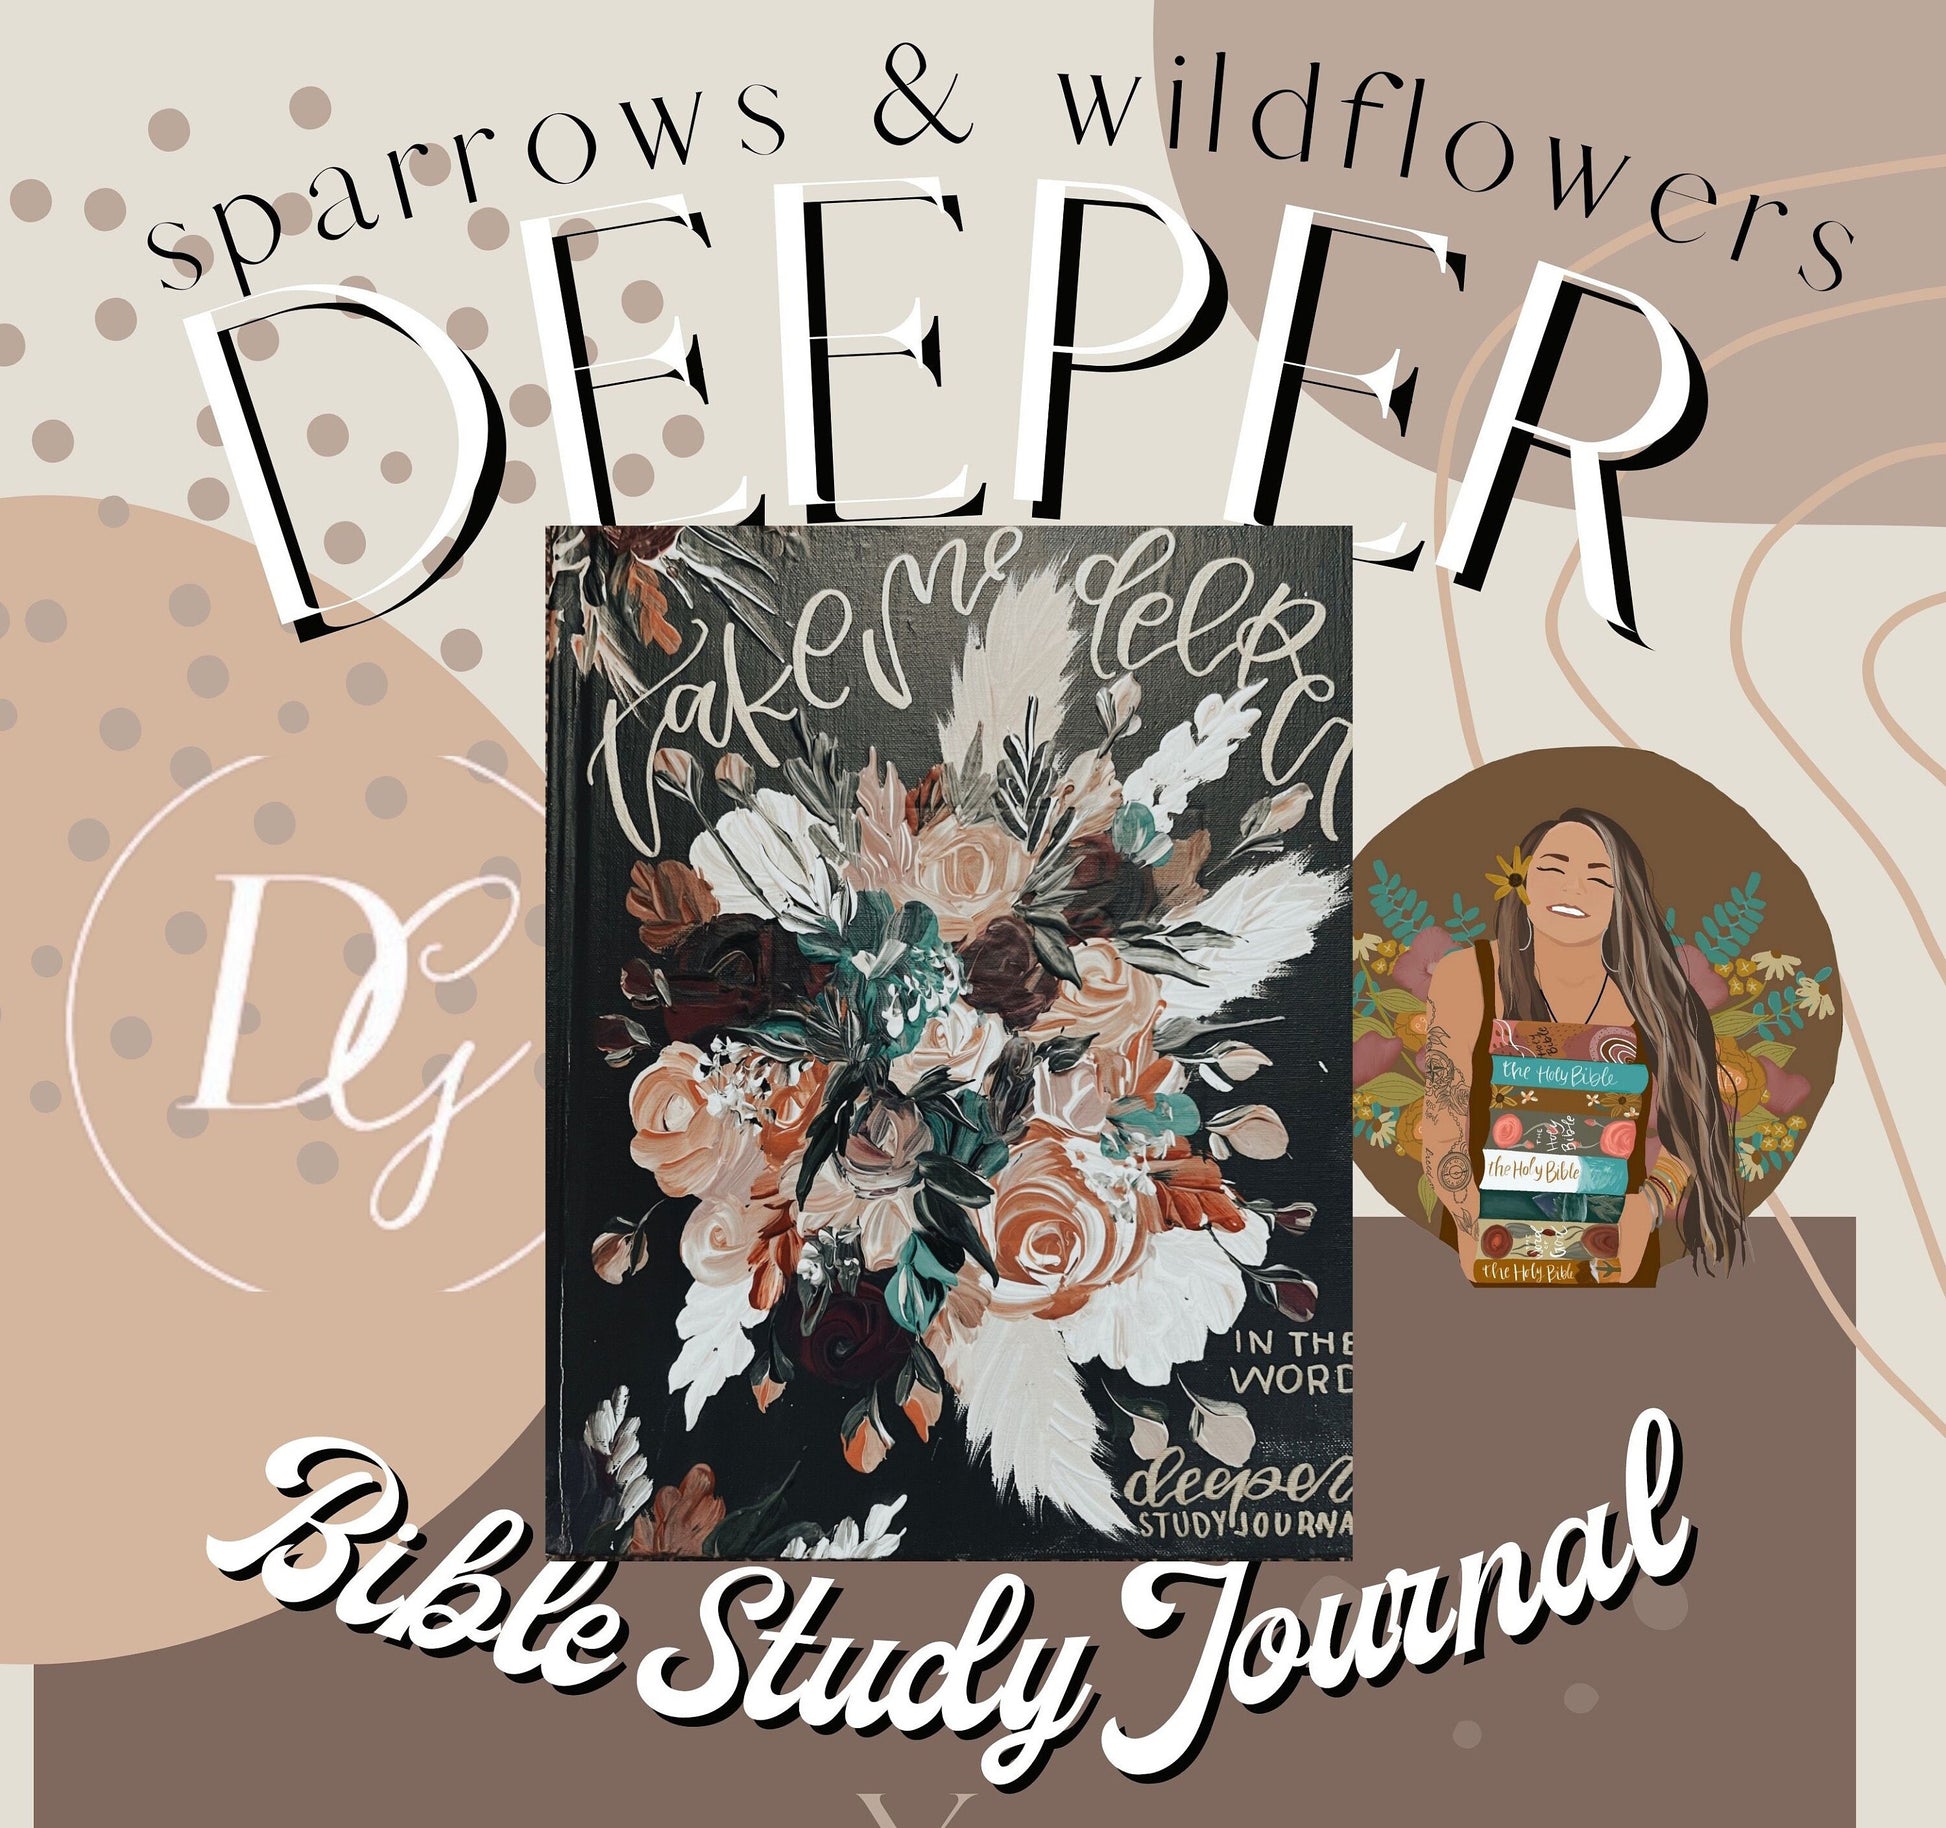 Deeper  Bible Study Journal by Daily Grace Co. – Sparrows & Wildflowers